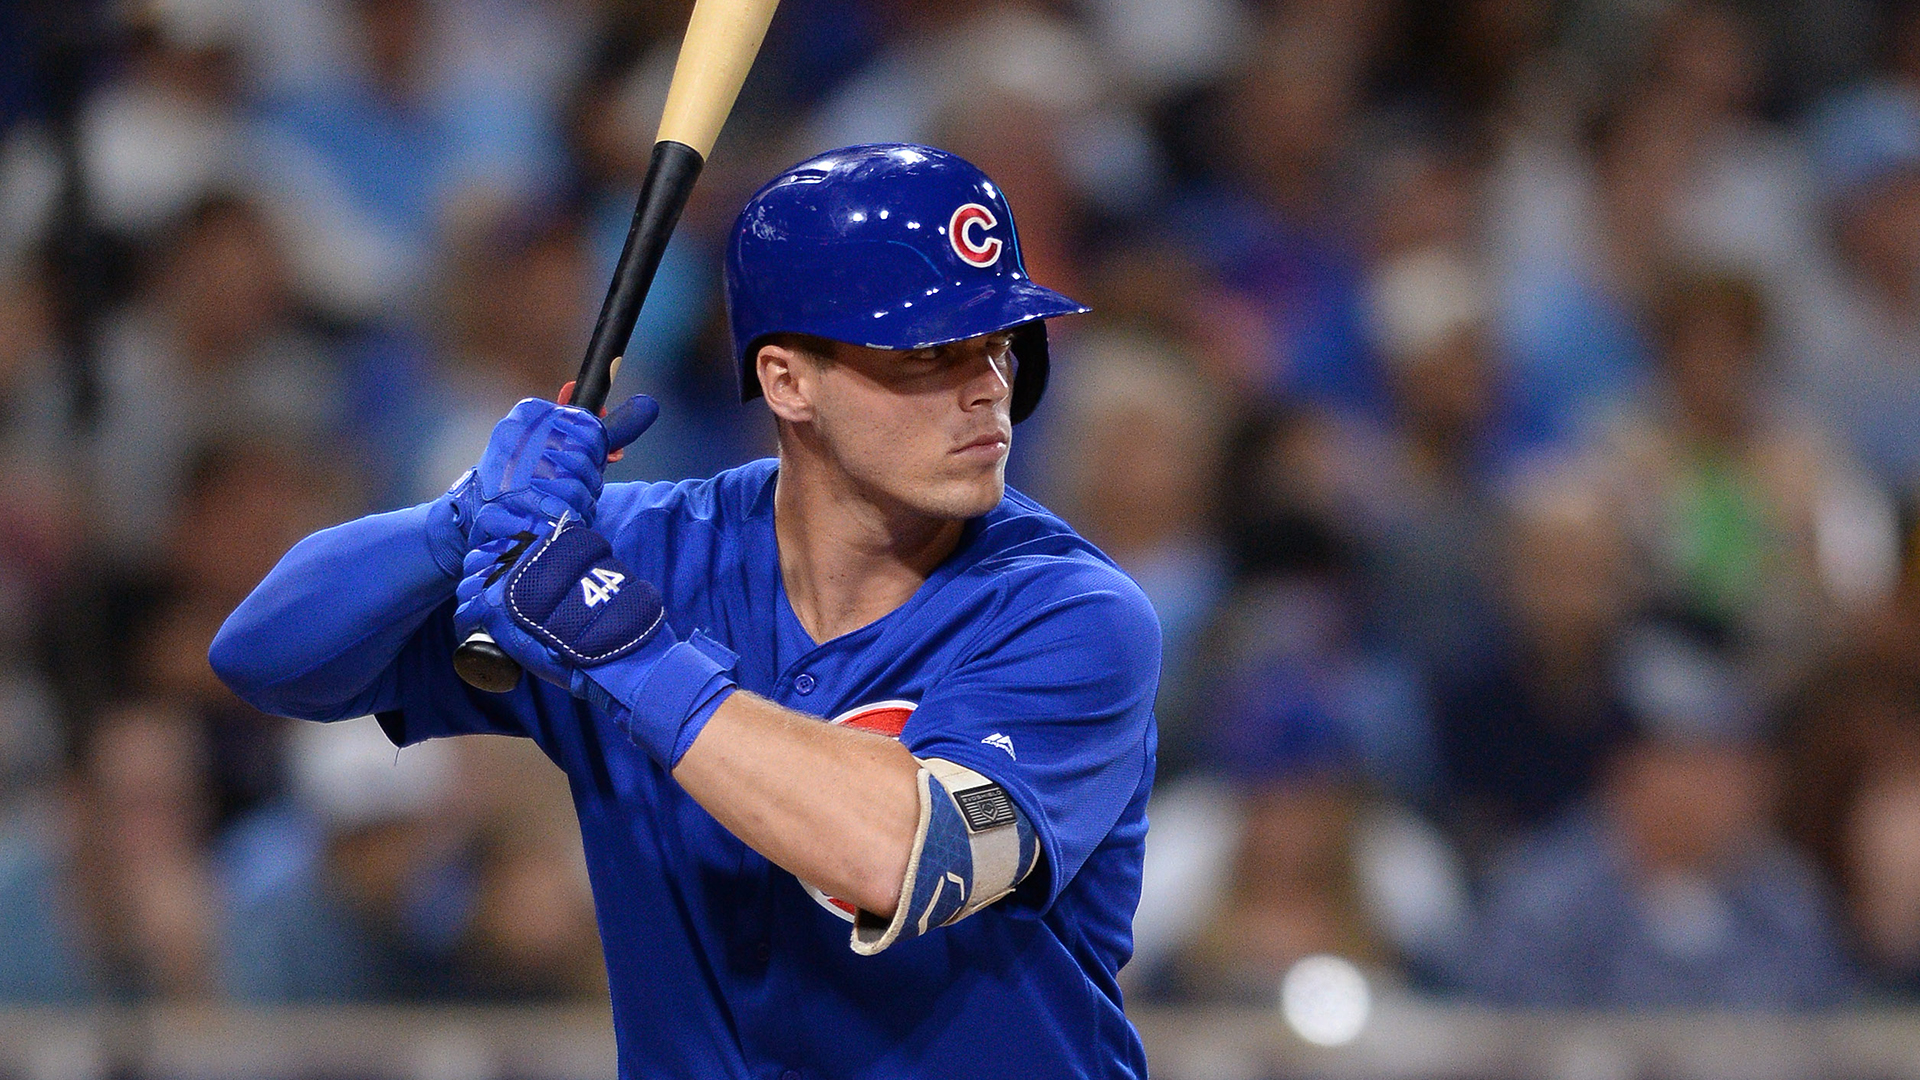 Cubs debut new lineup with Nico Hoerner featured front and center